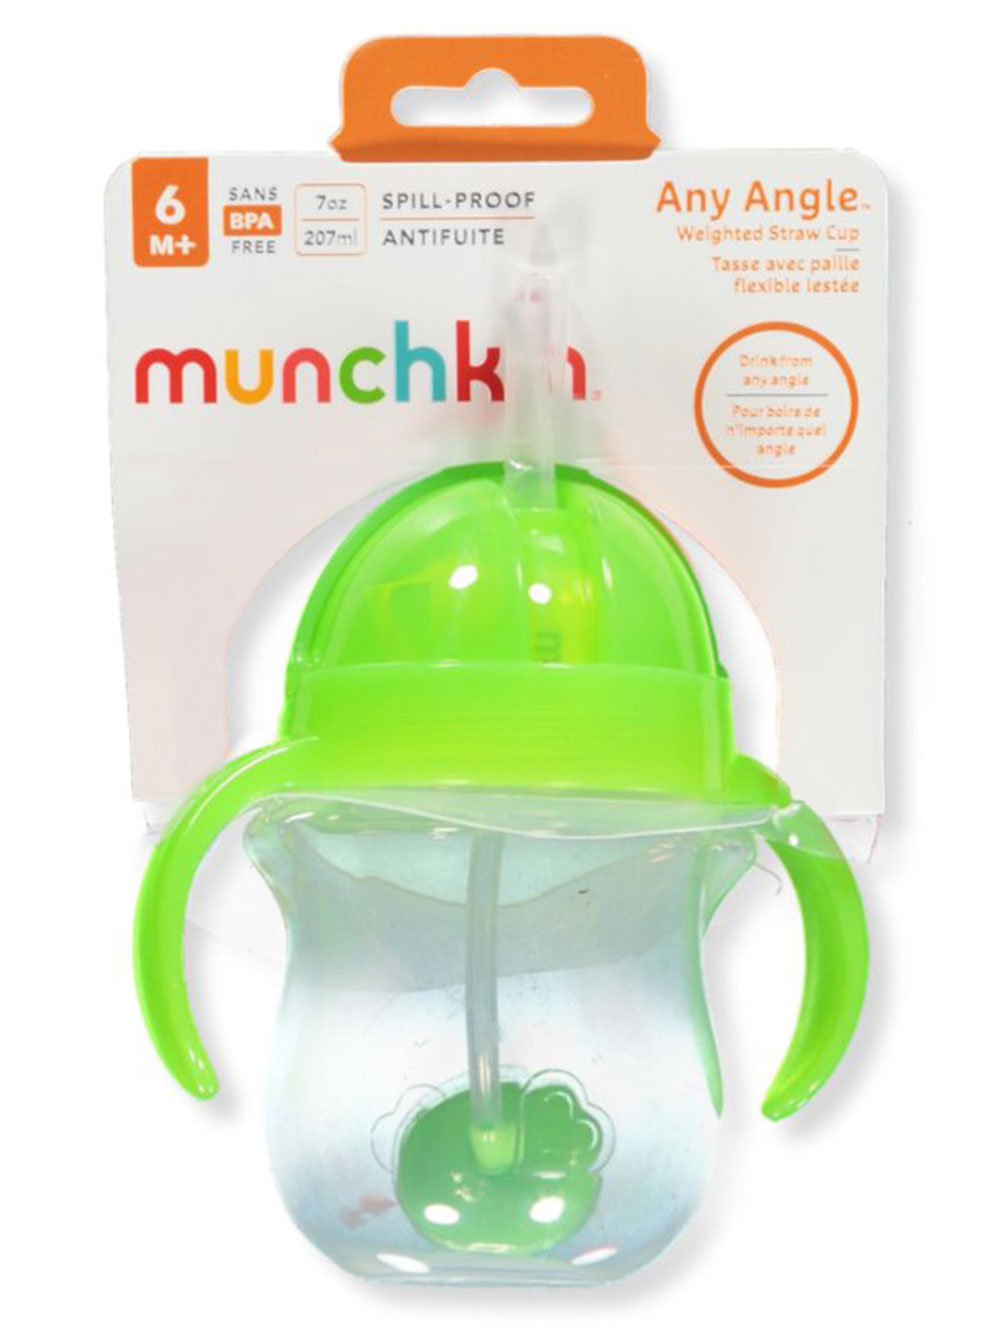 Munchkin Any Angle Weighted Straw Cup - Neon Green